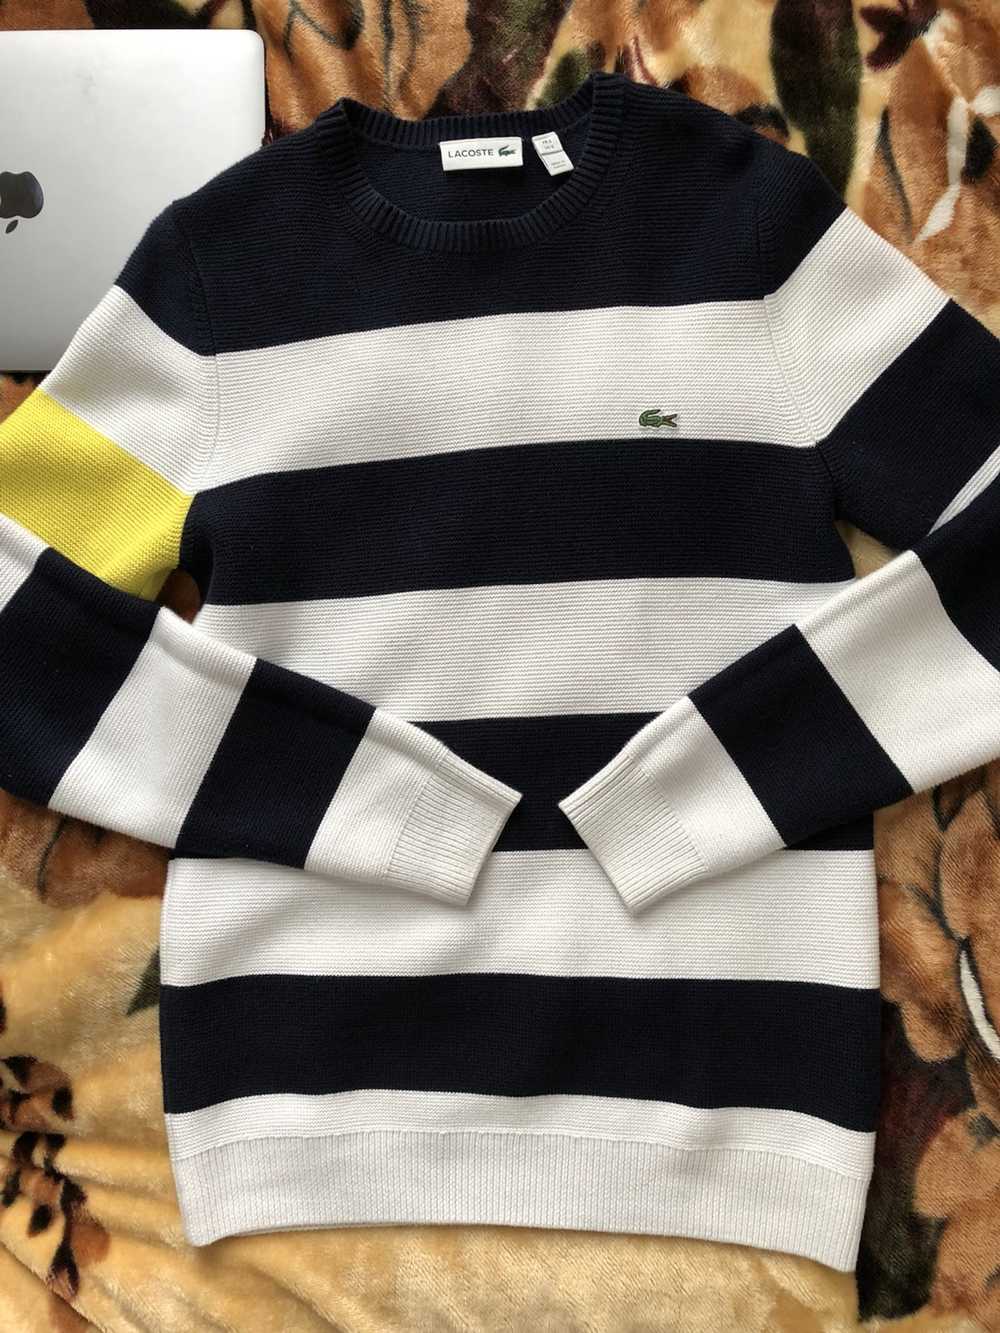 Lacoste Knit Sweater - image 2